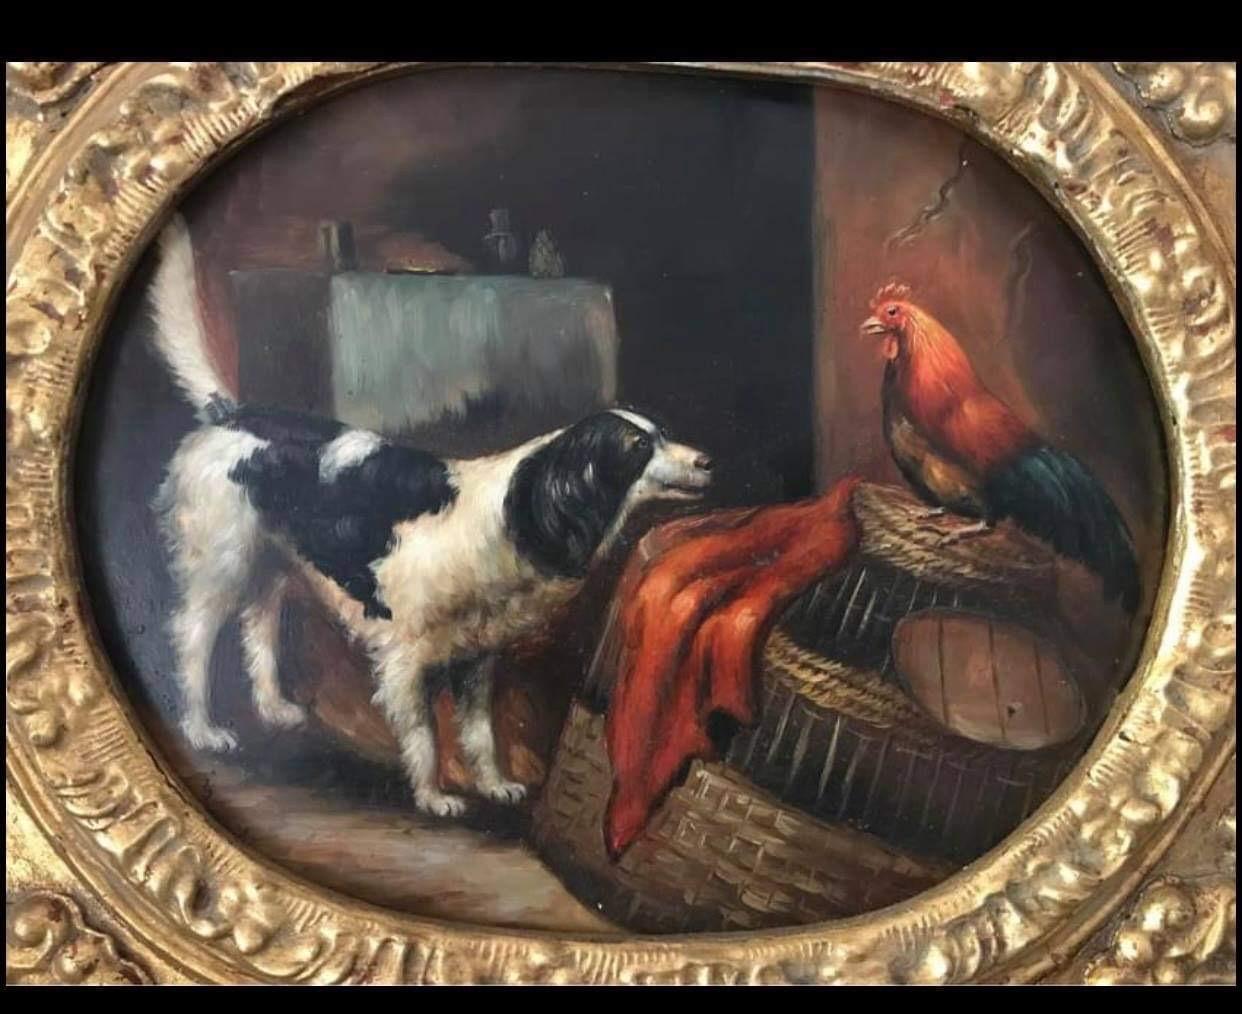 A beautiful oil painting by unknown artist, signature below the frame, unrecognised.